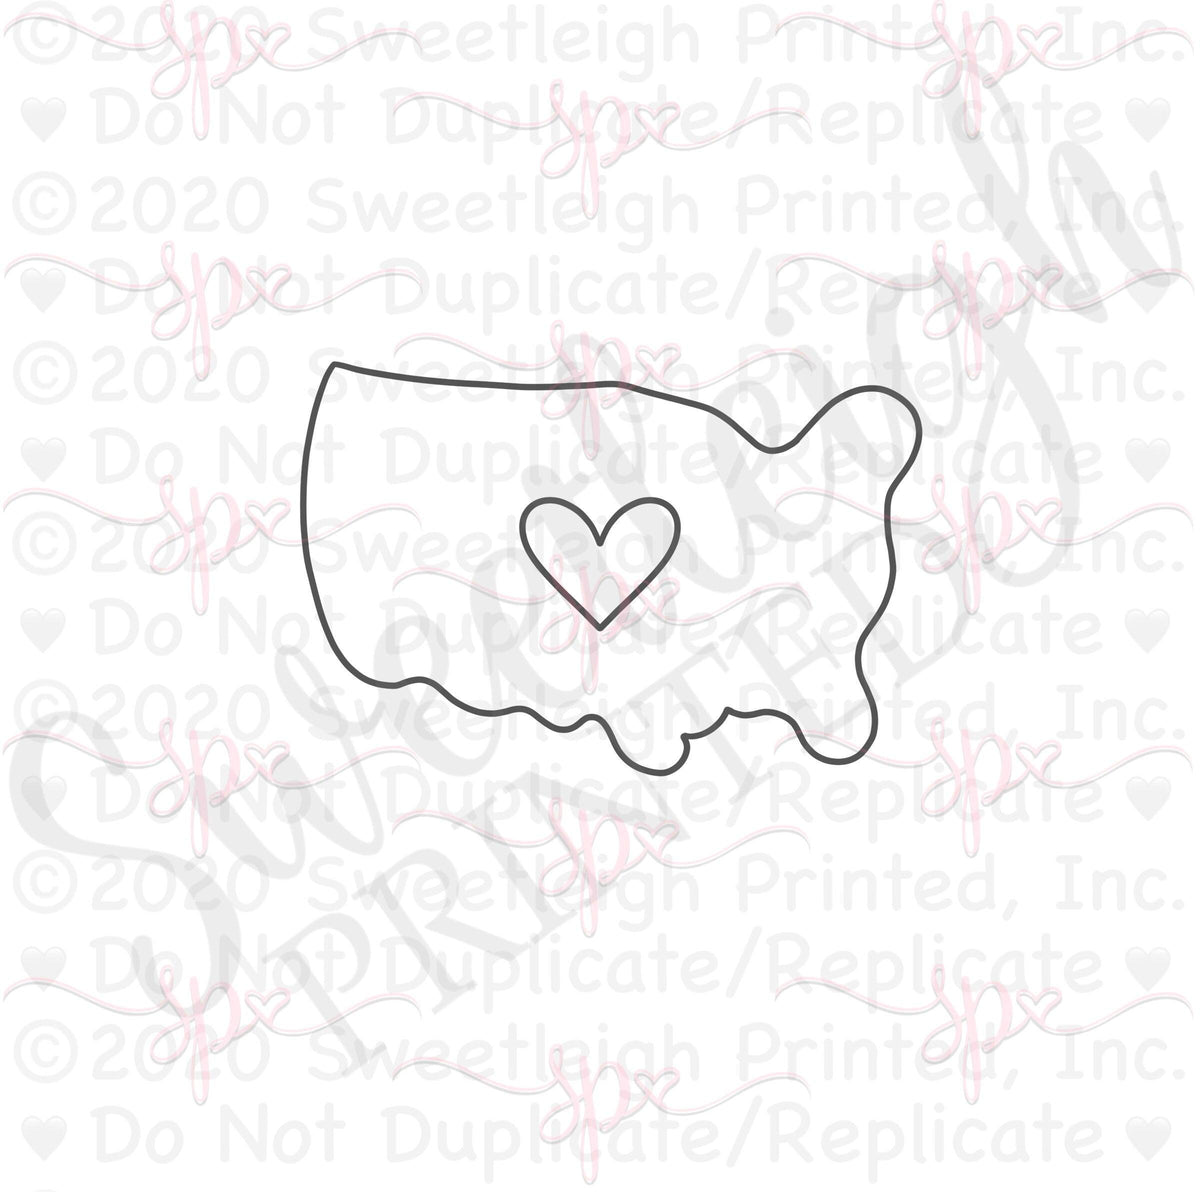 United States with Heart Cutout Cookie Cutter - Sweetleigh 